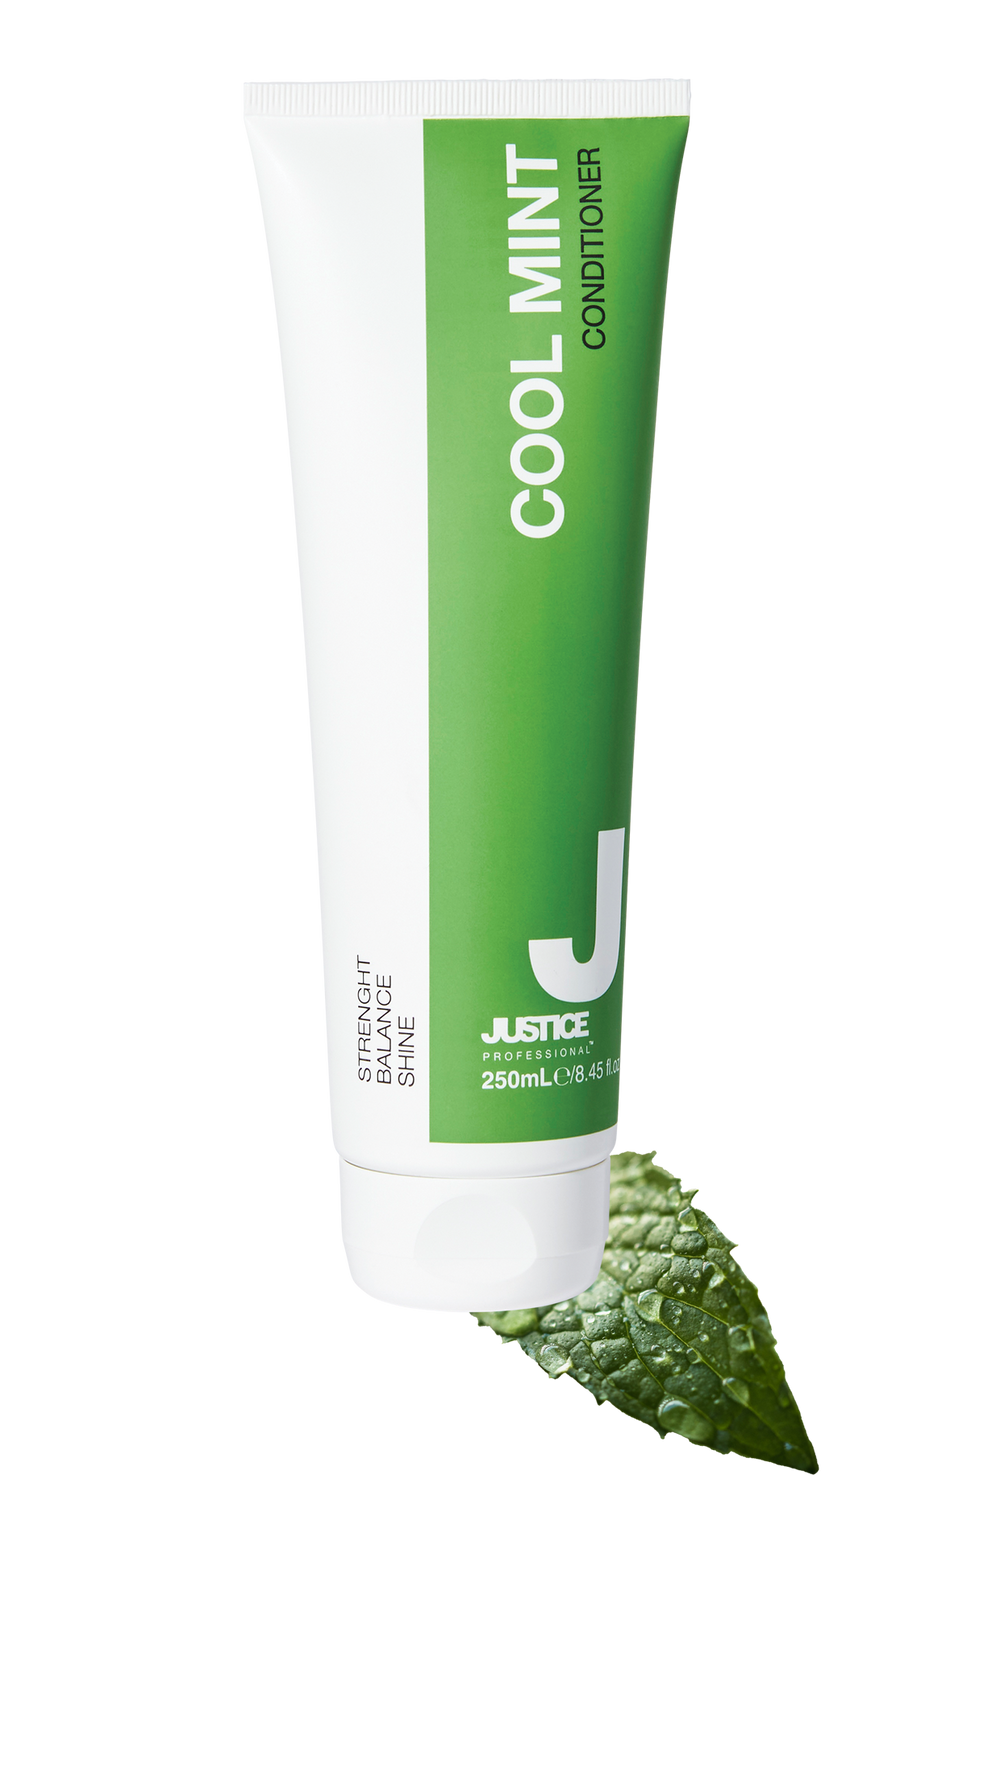 Cool Mint Conditioner - 250ml